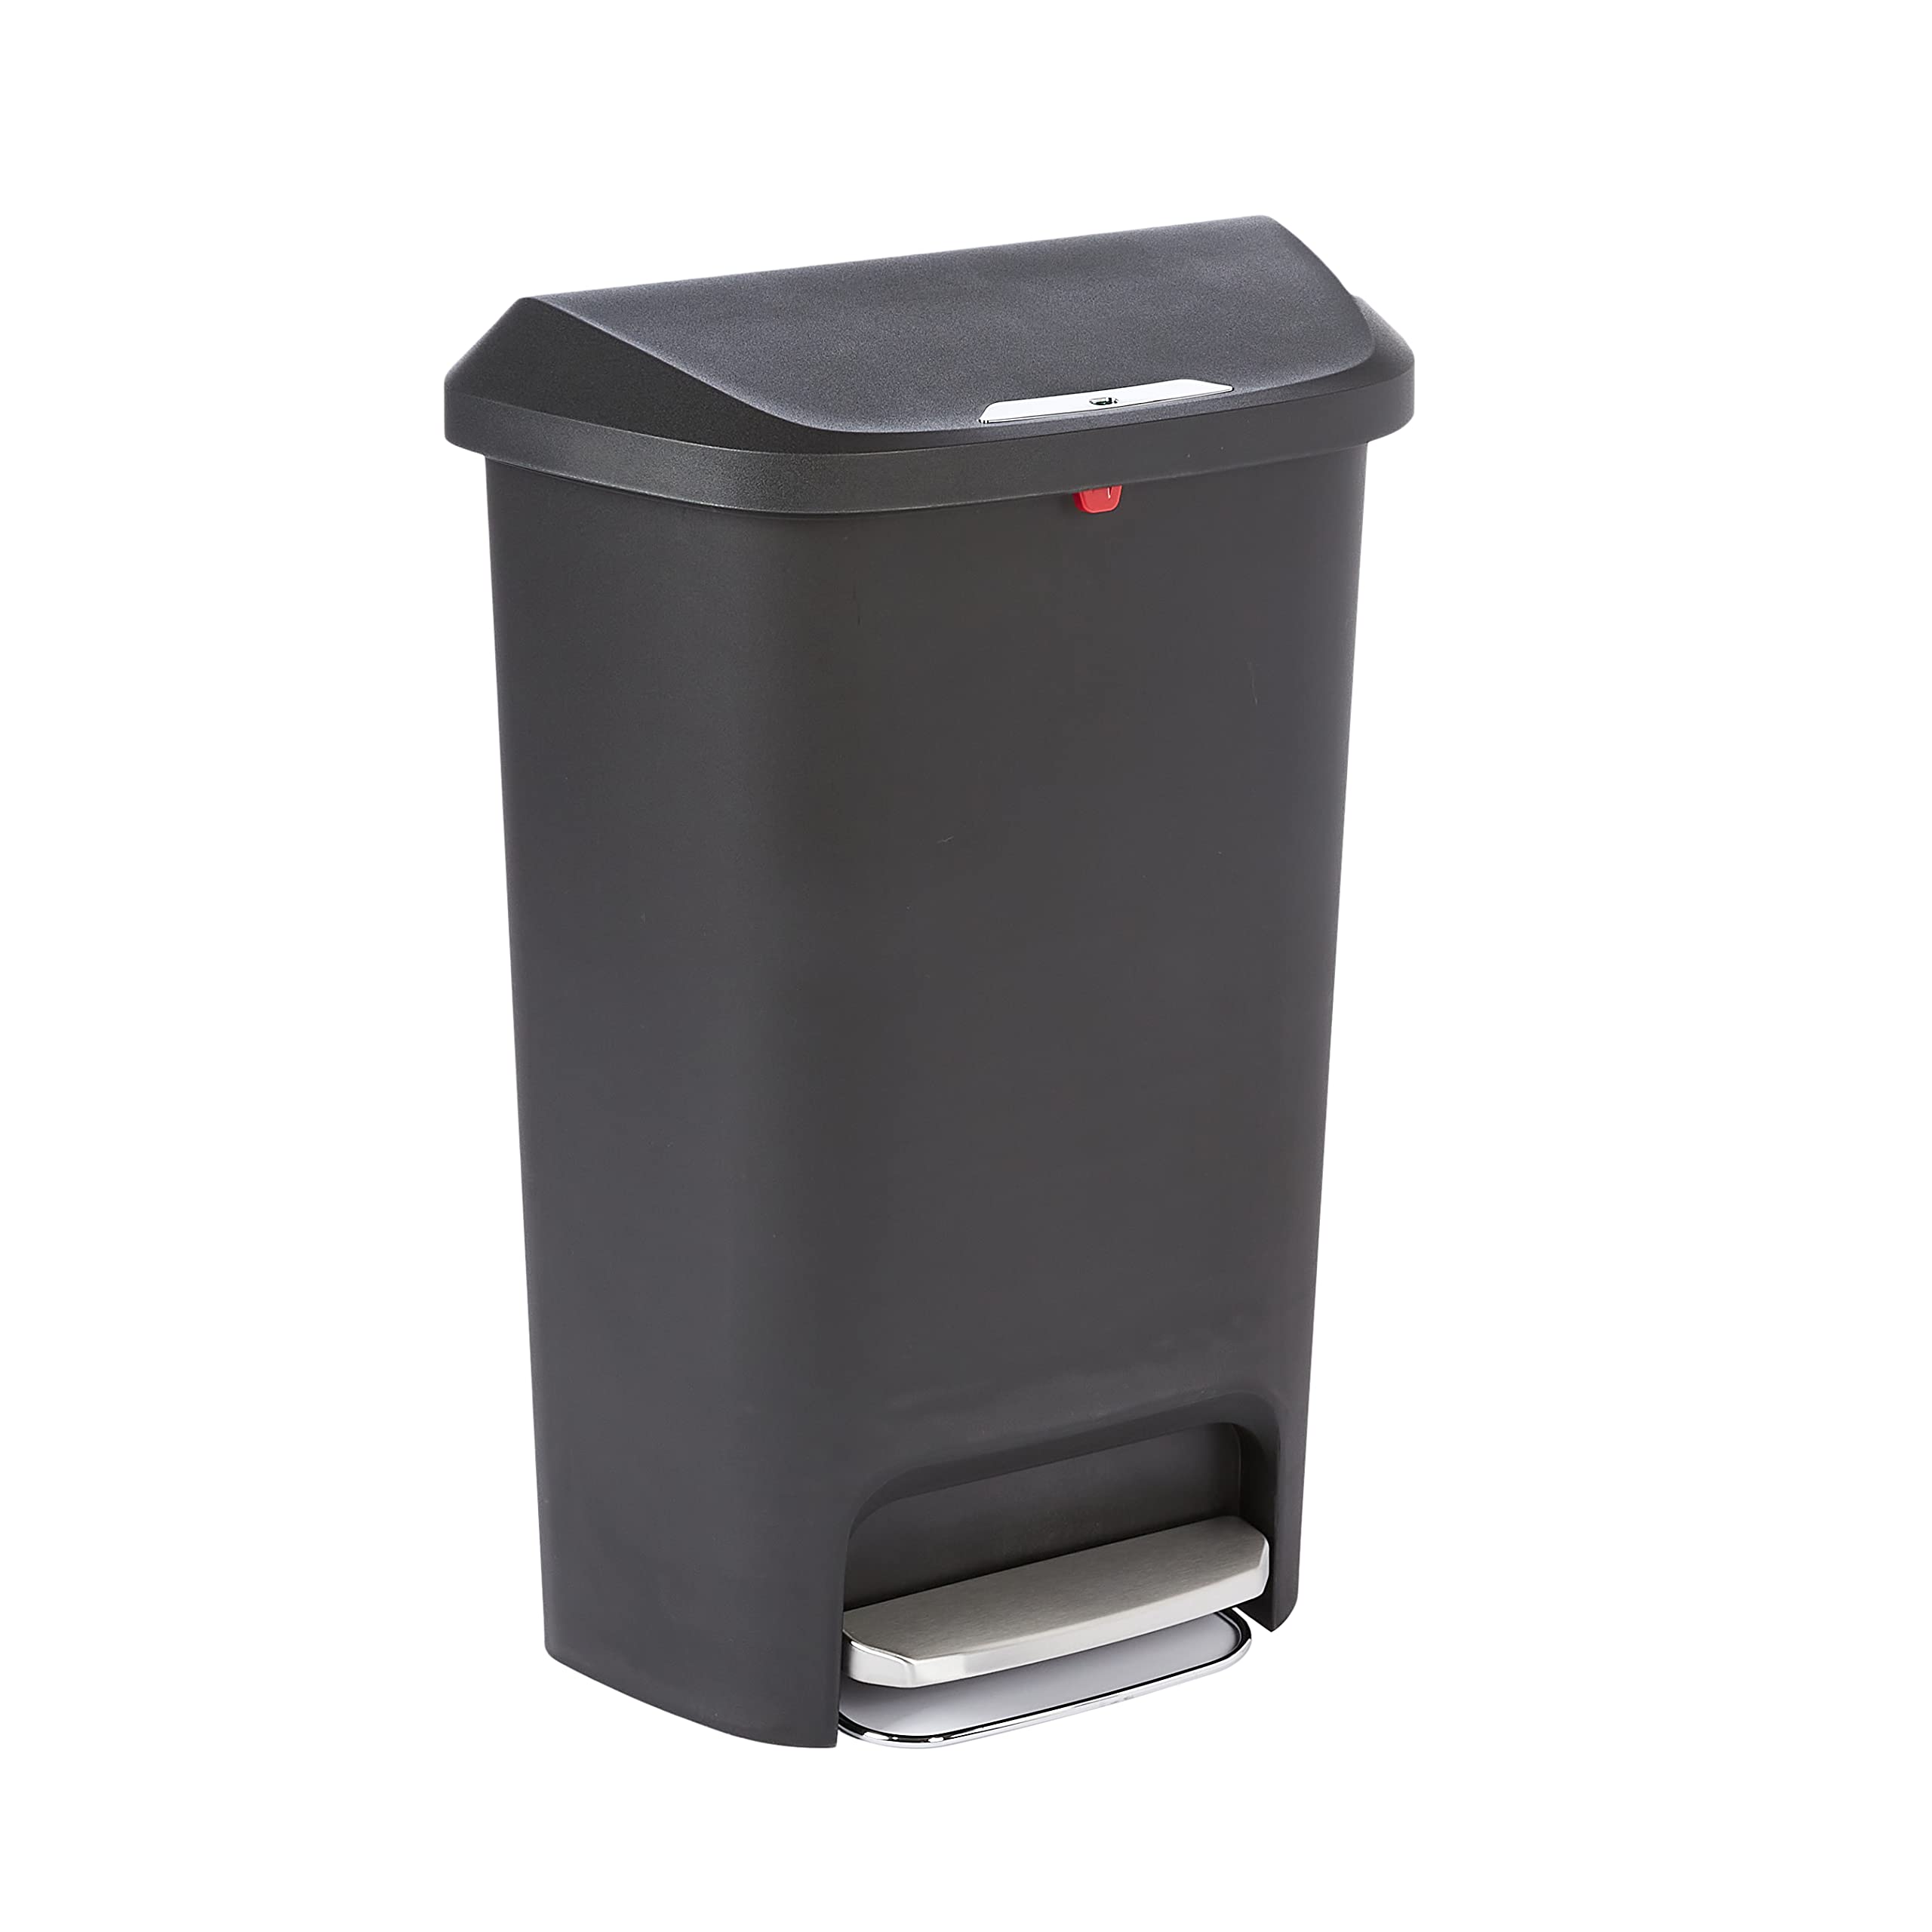 $28.00: Amazon Basics Tall Kitchen Plastic Rectangular Trash Can with Steel Pedal, Black, 50 Liters (Prime Members)